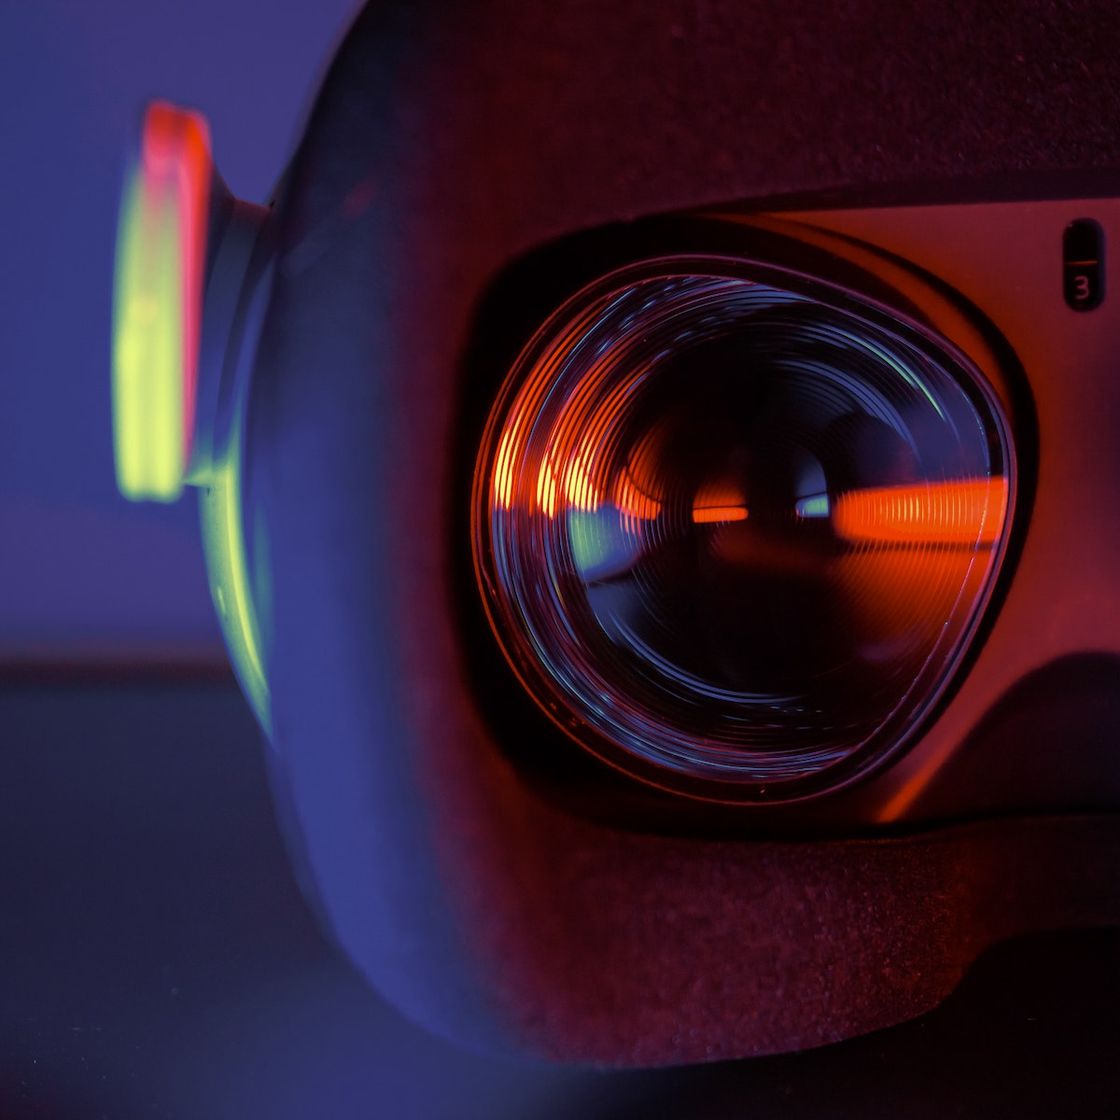 A close up of a VR headset with a glowing blue orange light